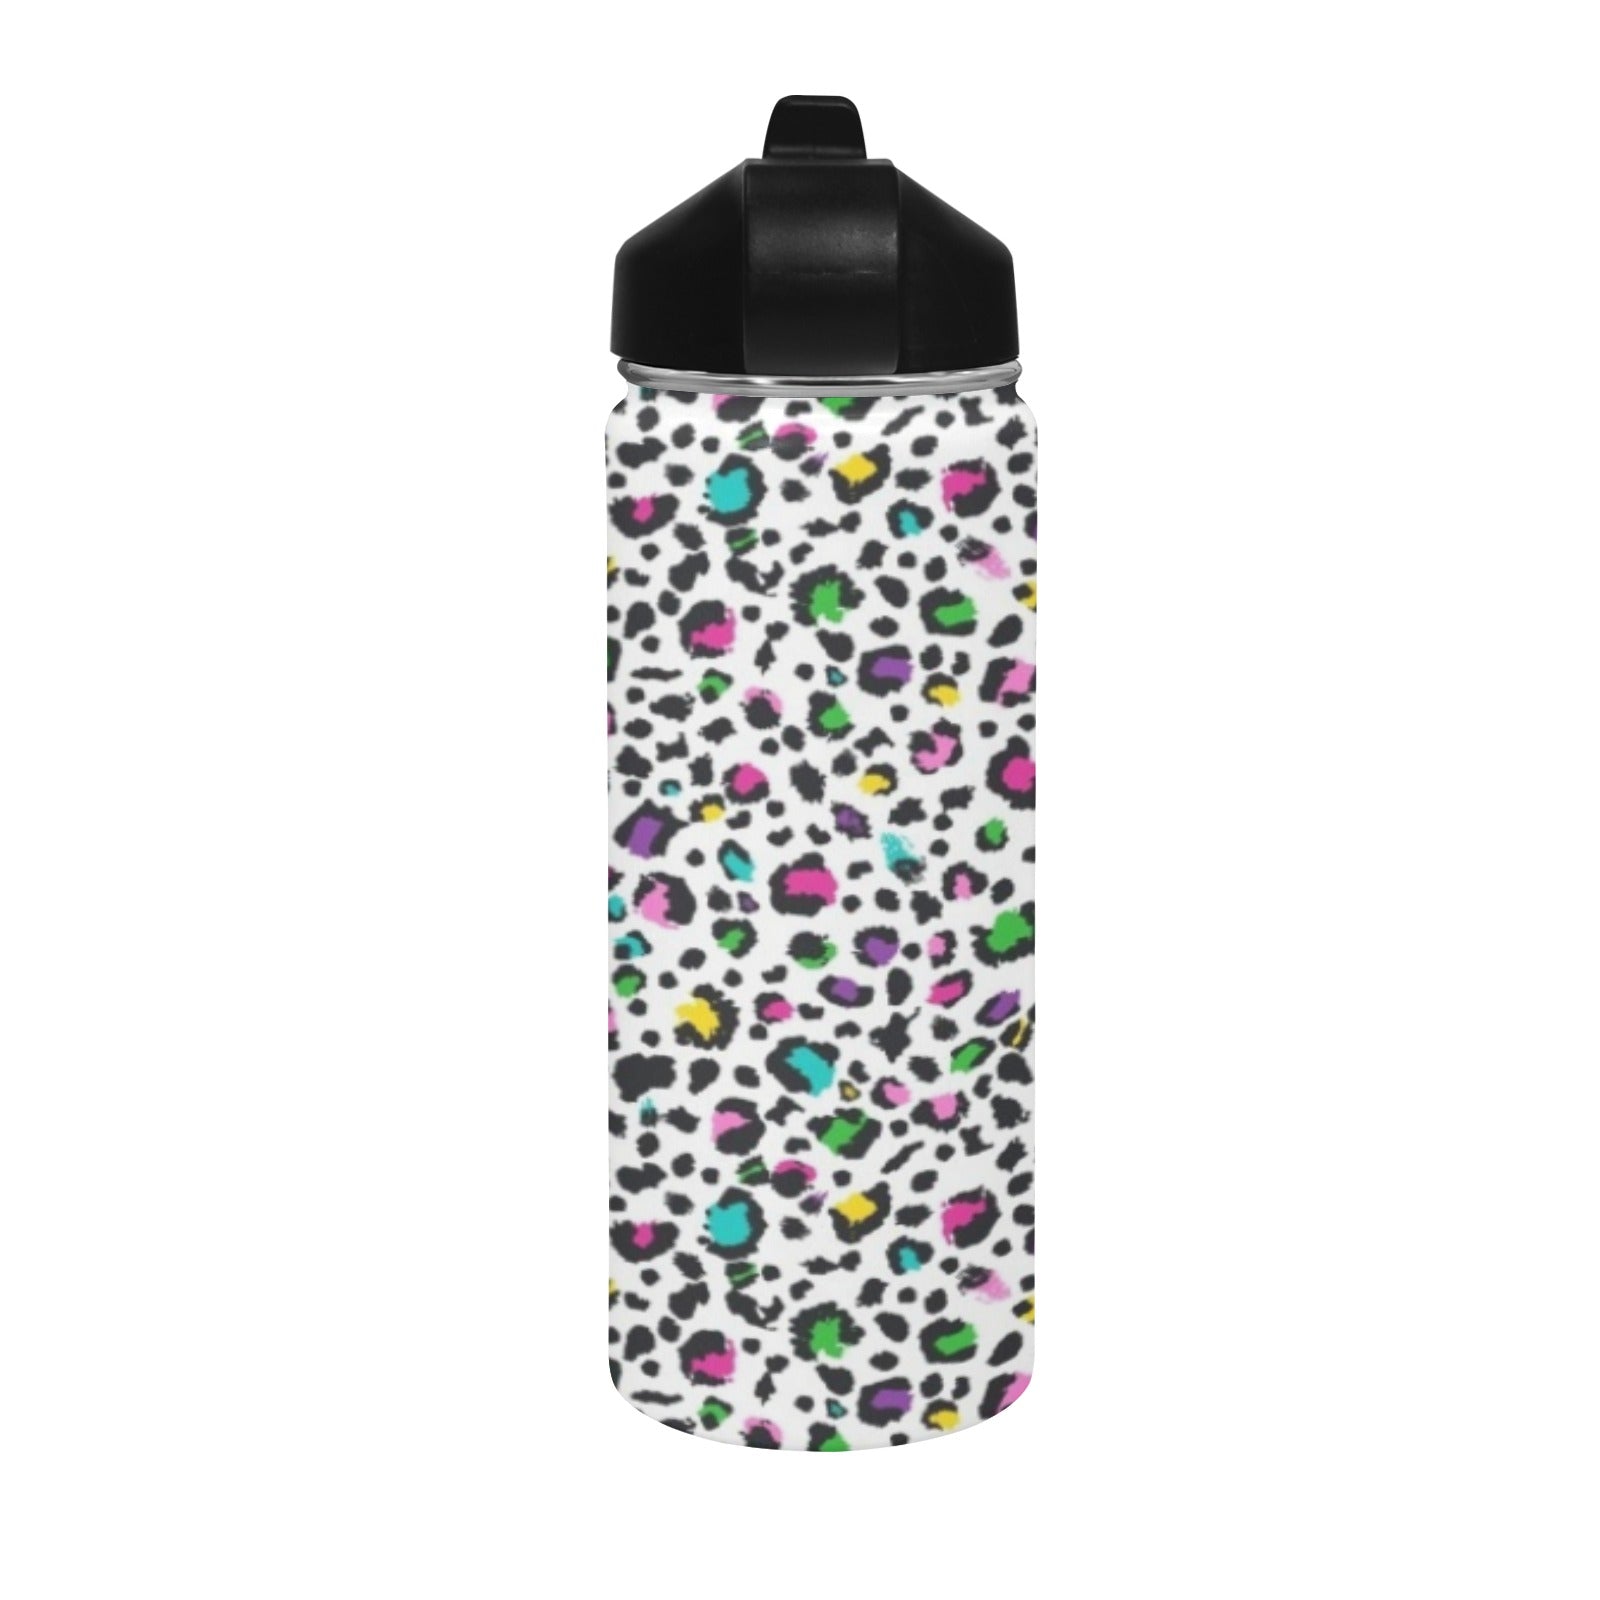 Animal Print In Colour - Insulated Water Bottle with Straw Lid (18 oz) Insulated Water Bottle with Straw Lid